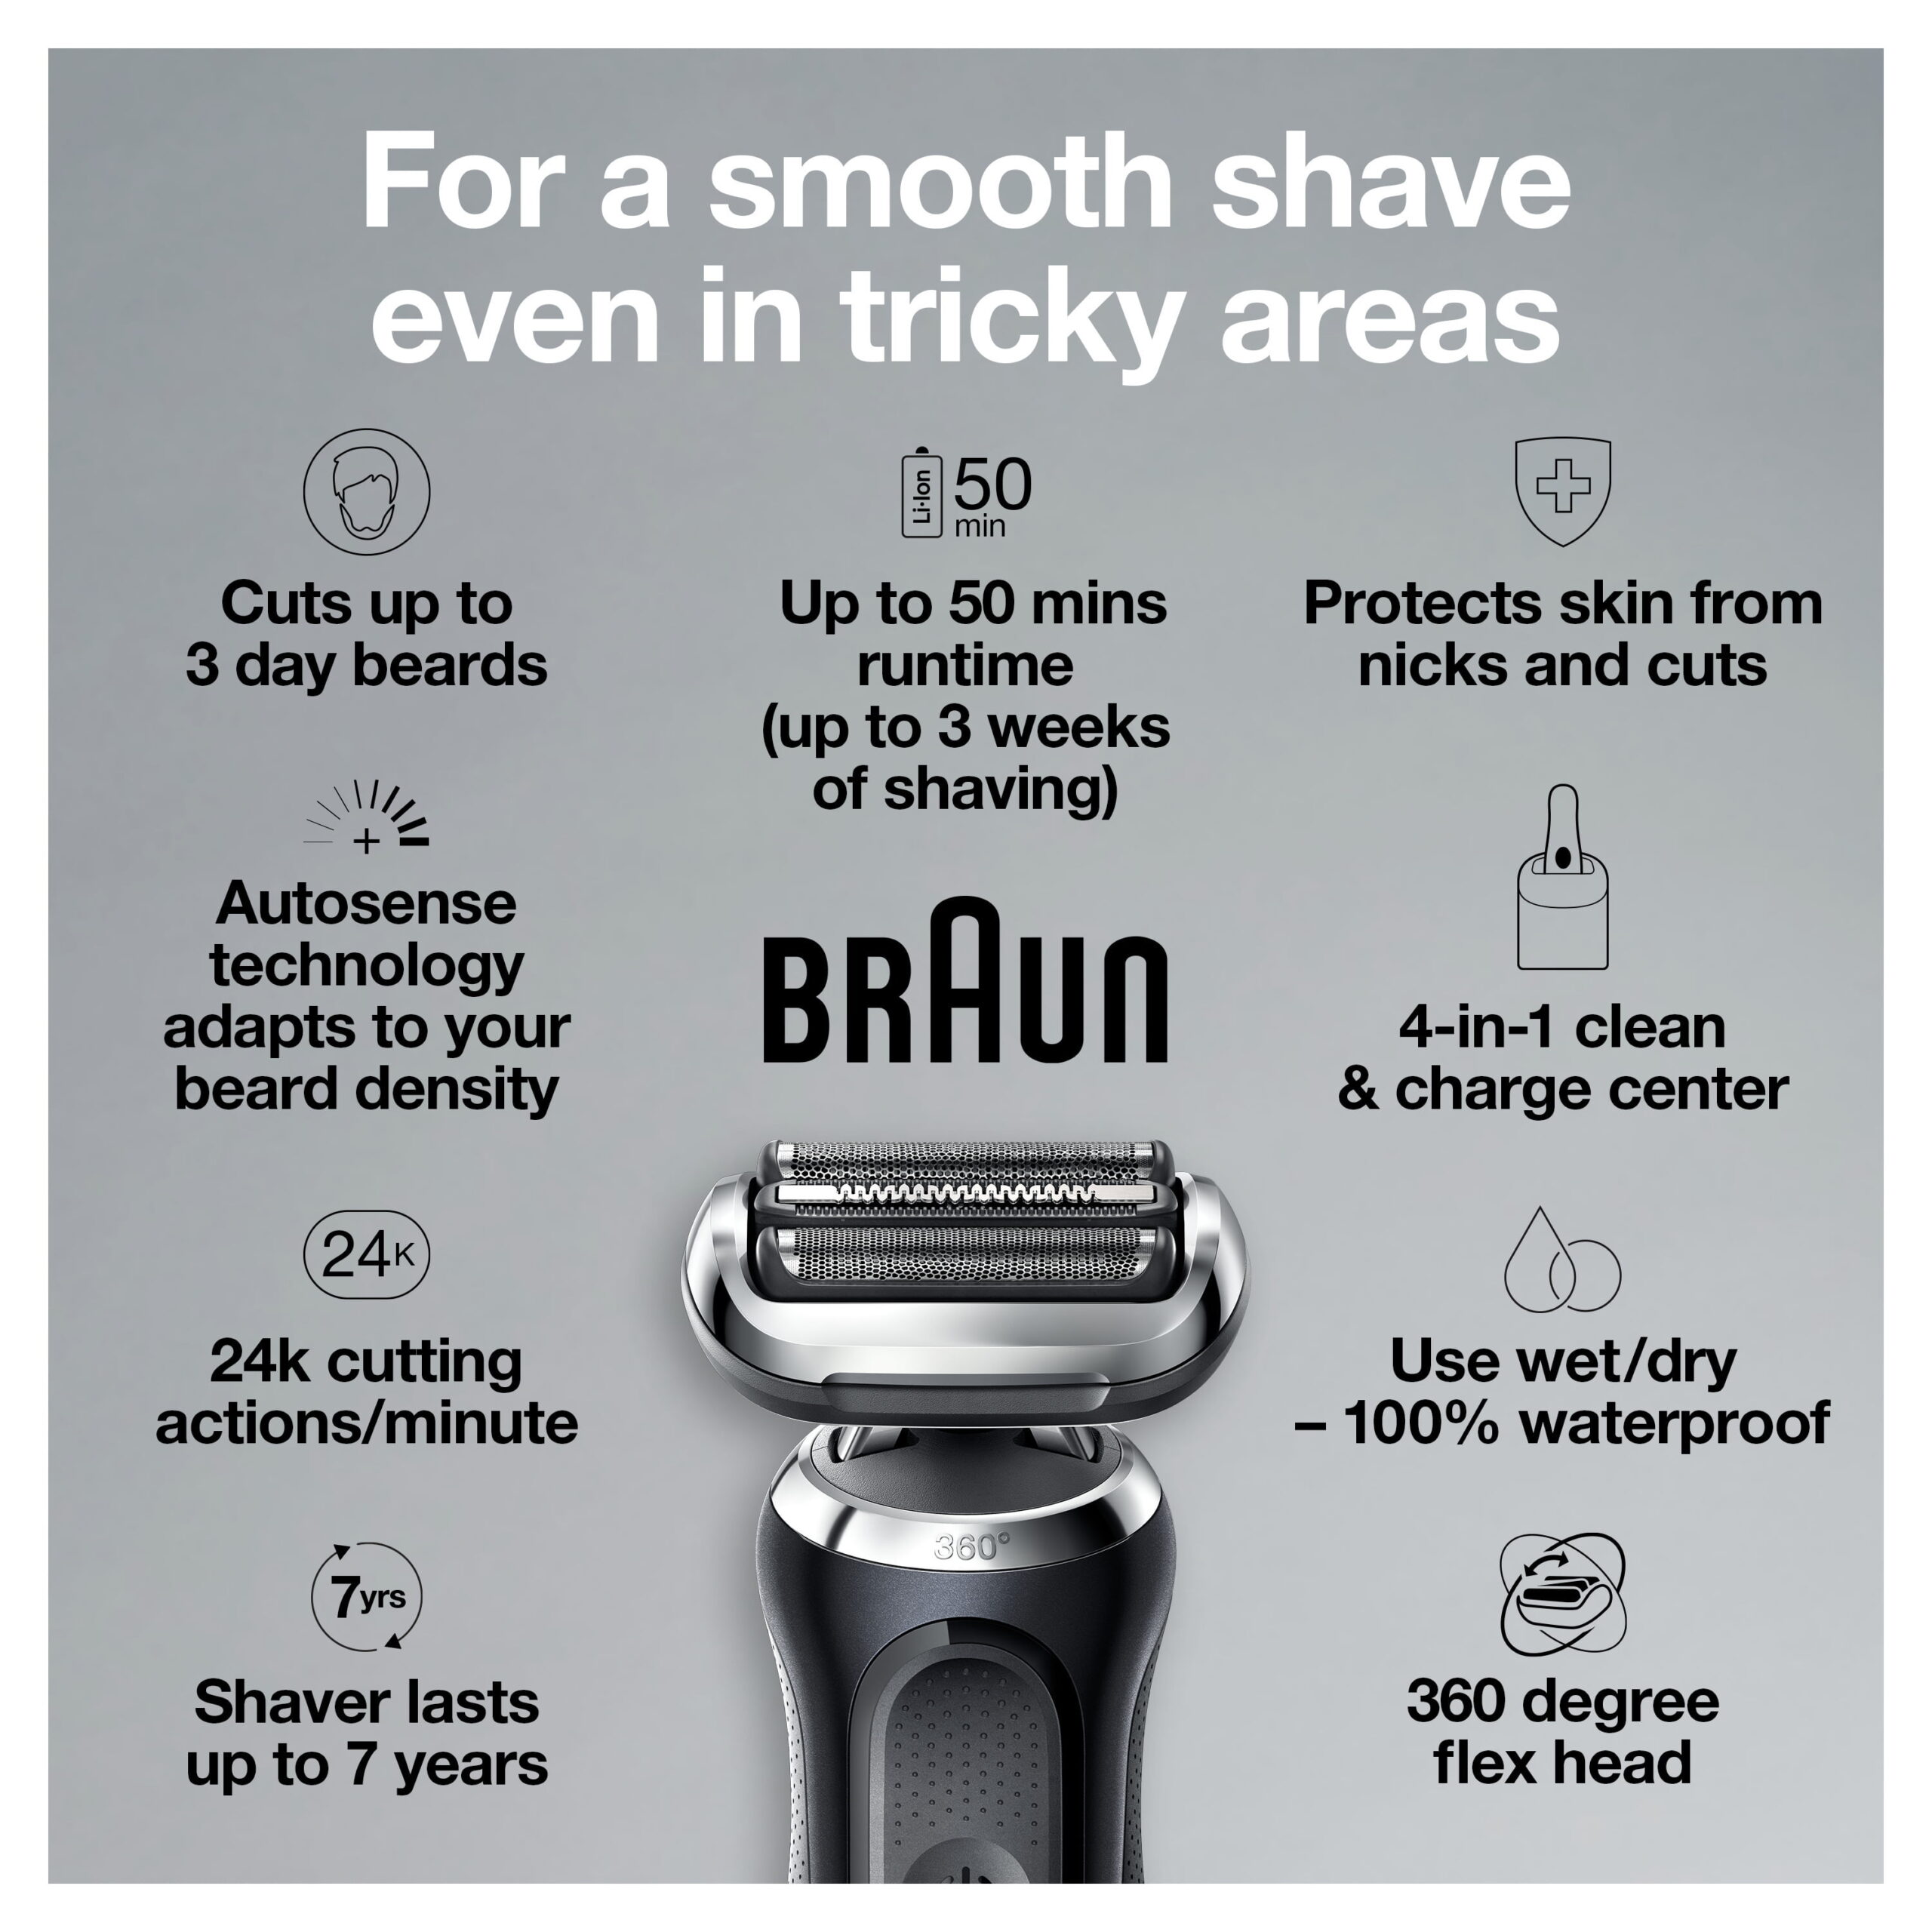 Braun SmartCare 4 in 1 cleaning base for men's Series 5, 6 and 7